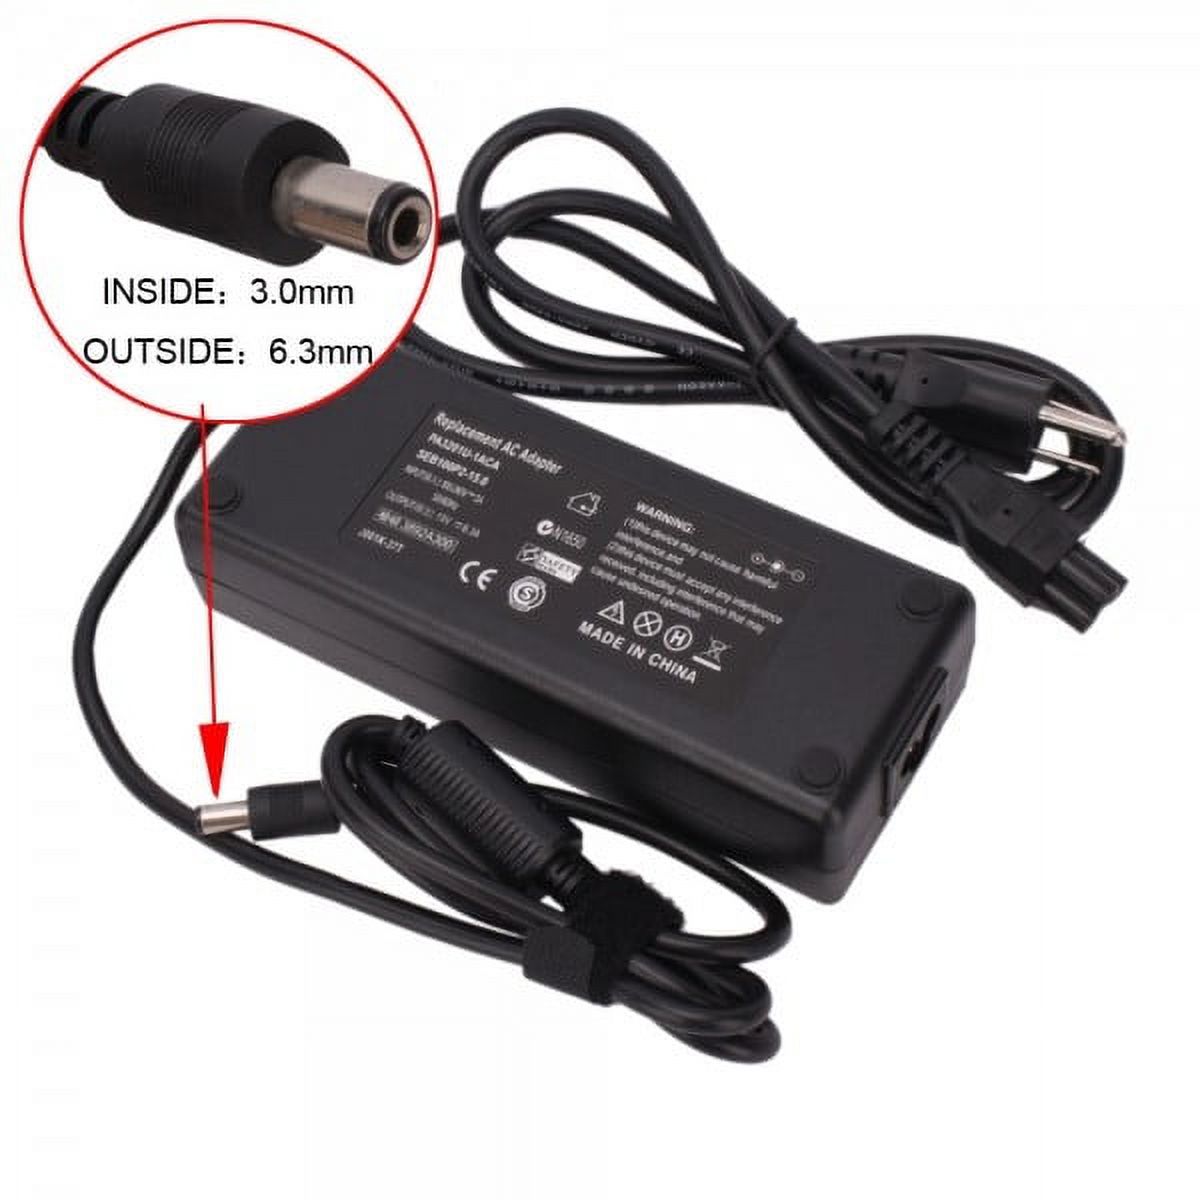 AC Power Adapter Charger For Toshiba Satellite P20-801 + Power Supply Cord 19V 6.3A 120W (Replacement Parts) - image 1 of 1